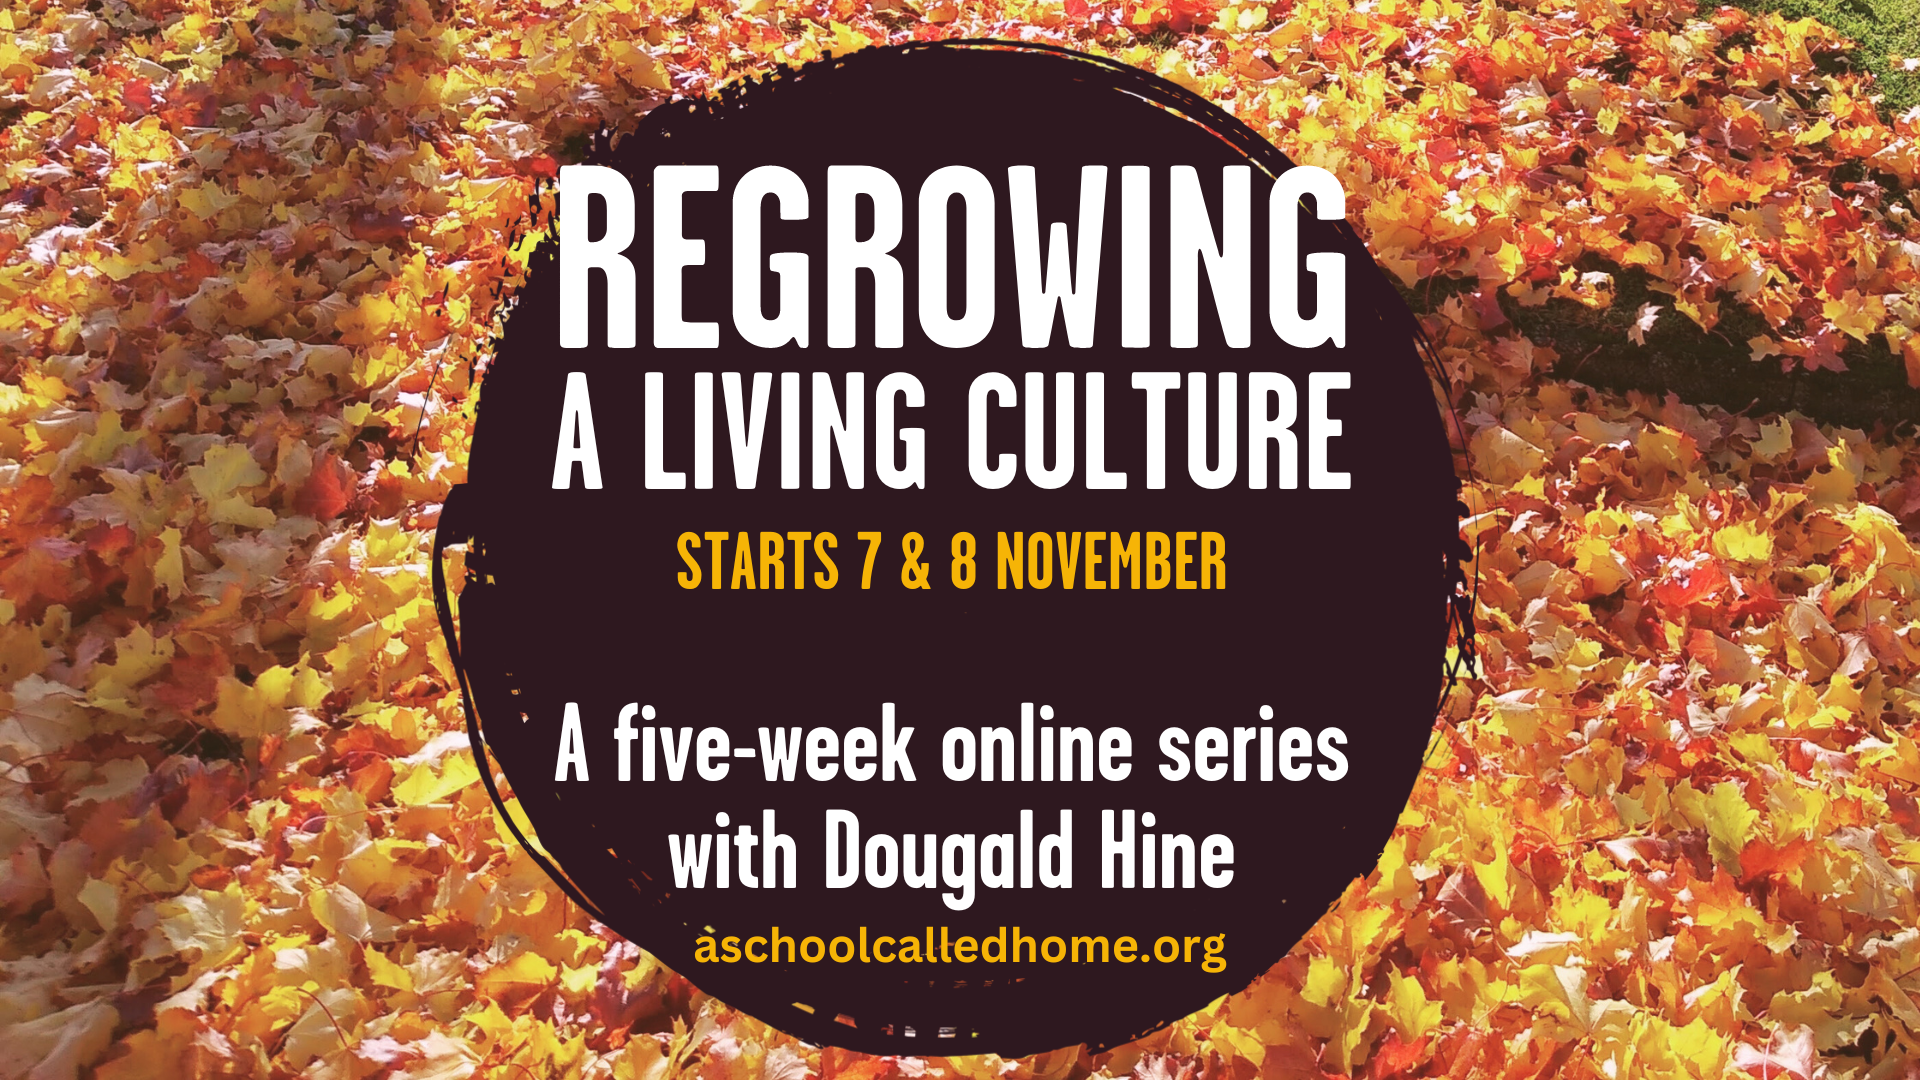 Regrowing a Living Culture – Starts 7 & 8 November
A five-week online series with Dougald Hine
aschoolcalledhome.org